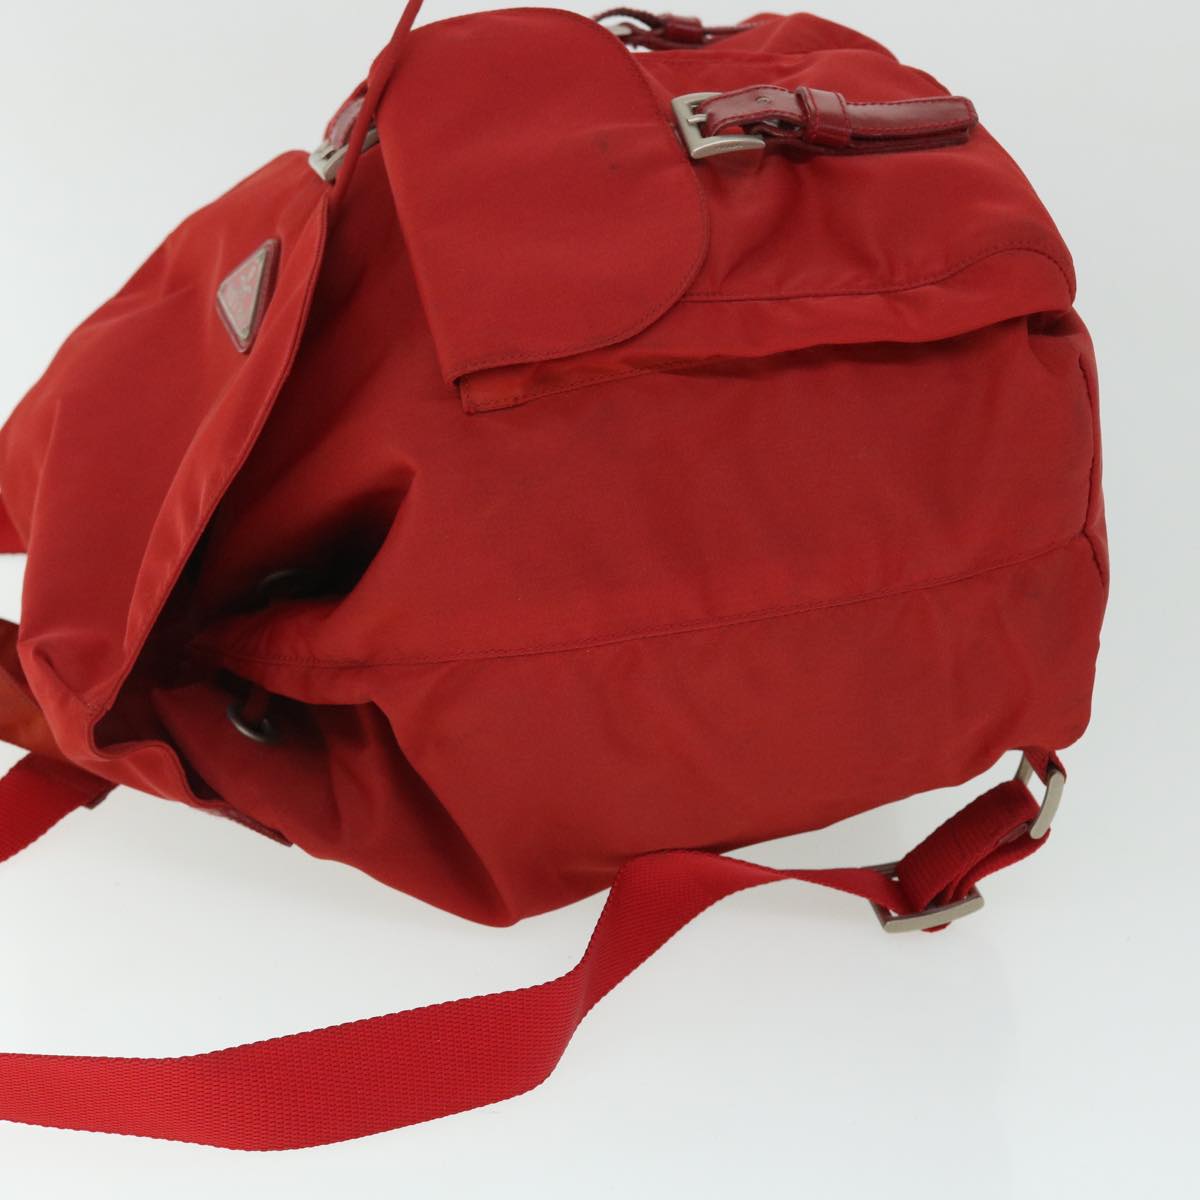 PRADA Backpack Nylon Leather Red Auth bs8103